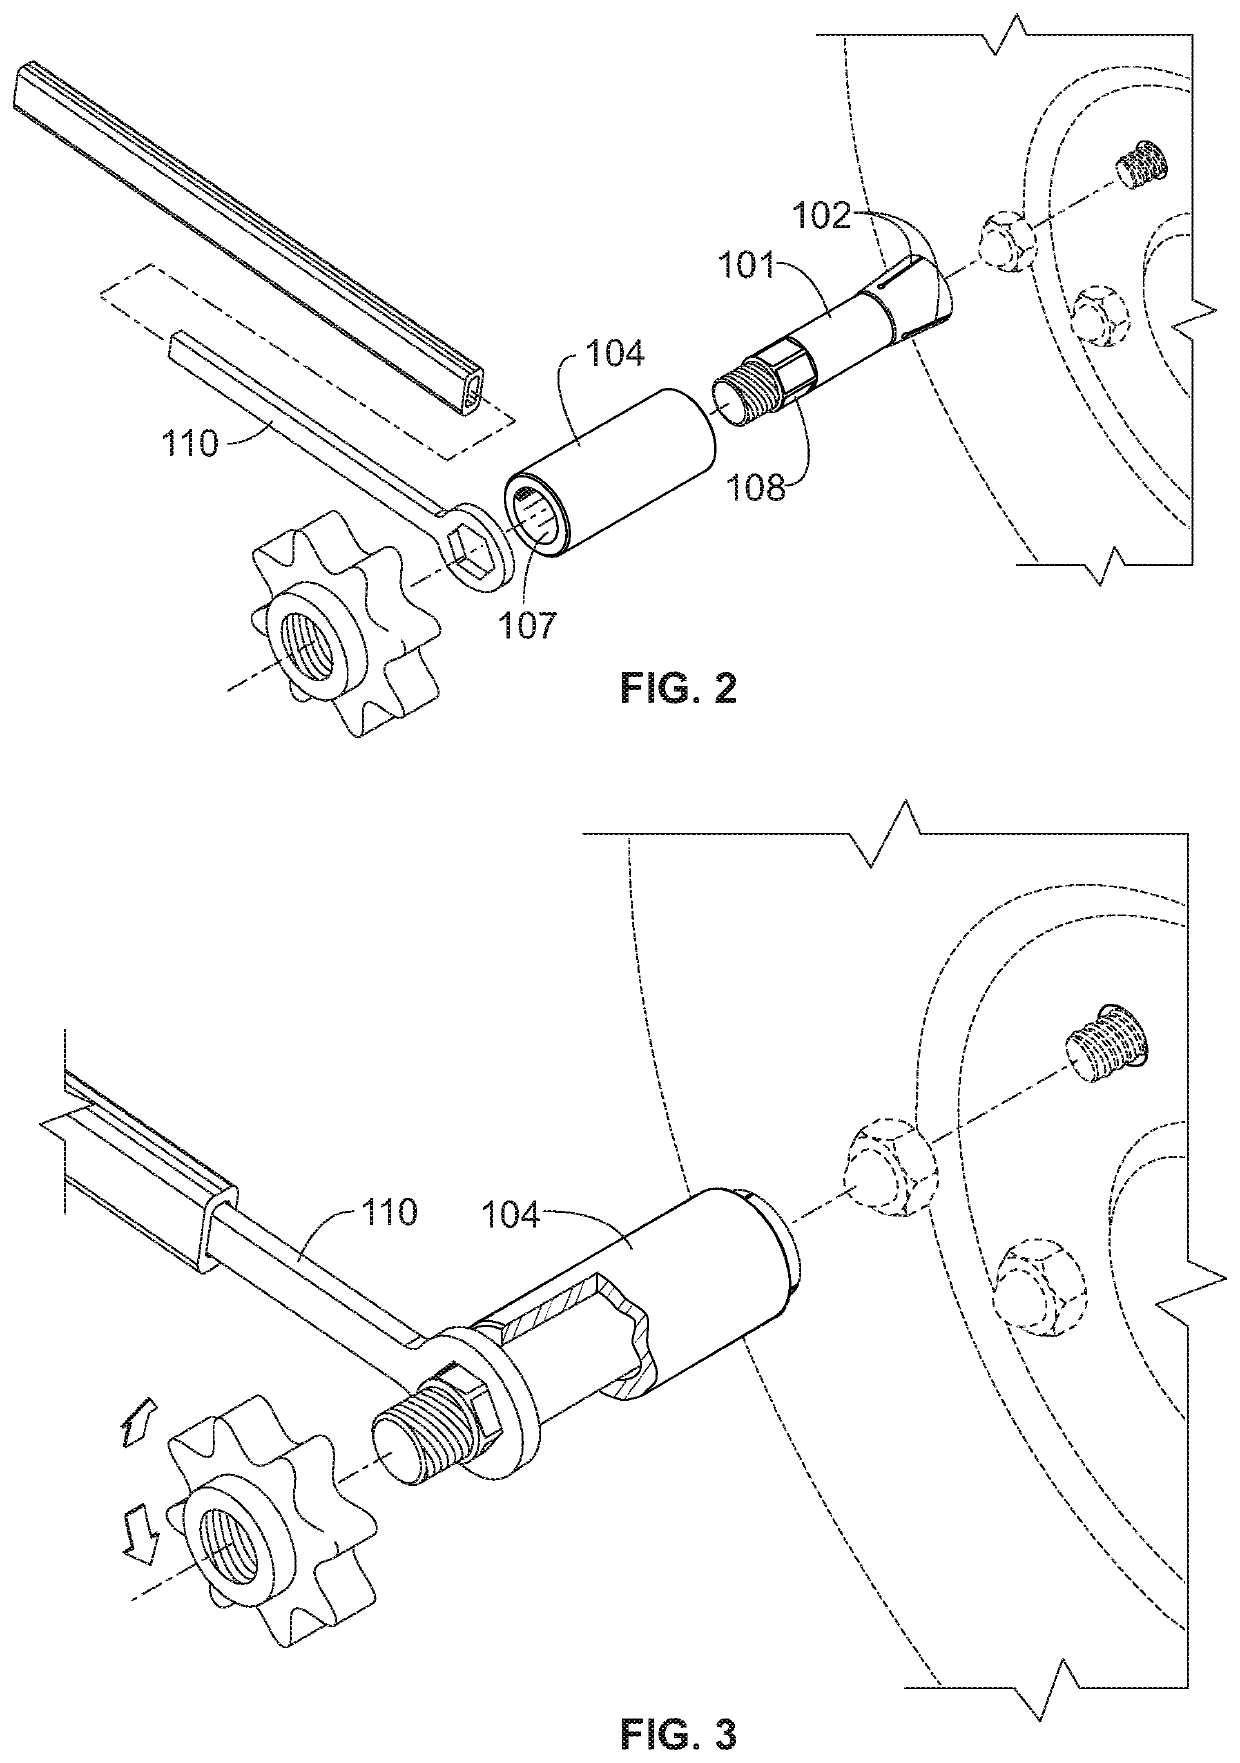 Lug wrench with secure clamping mechanism